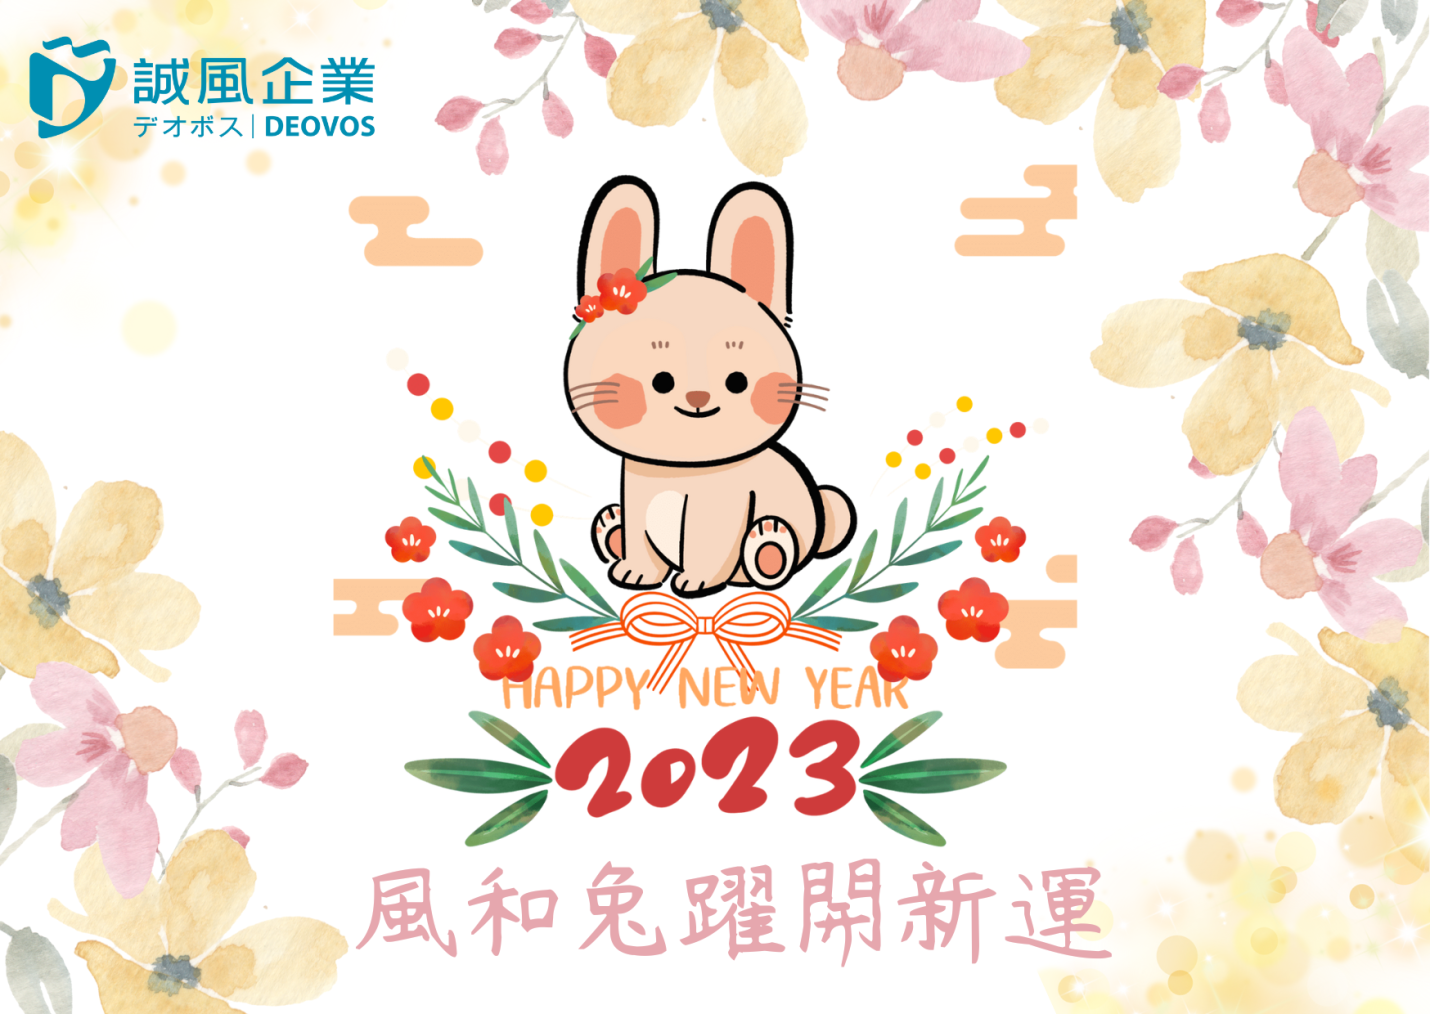 the year of RABBIT